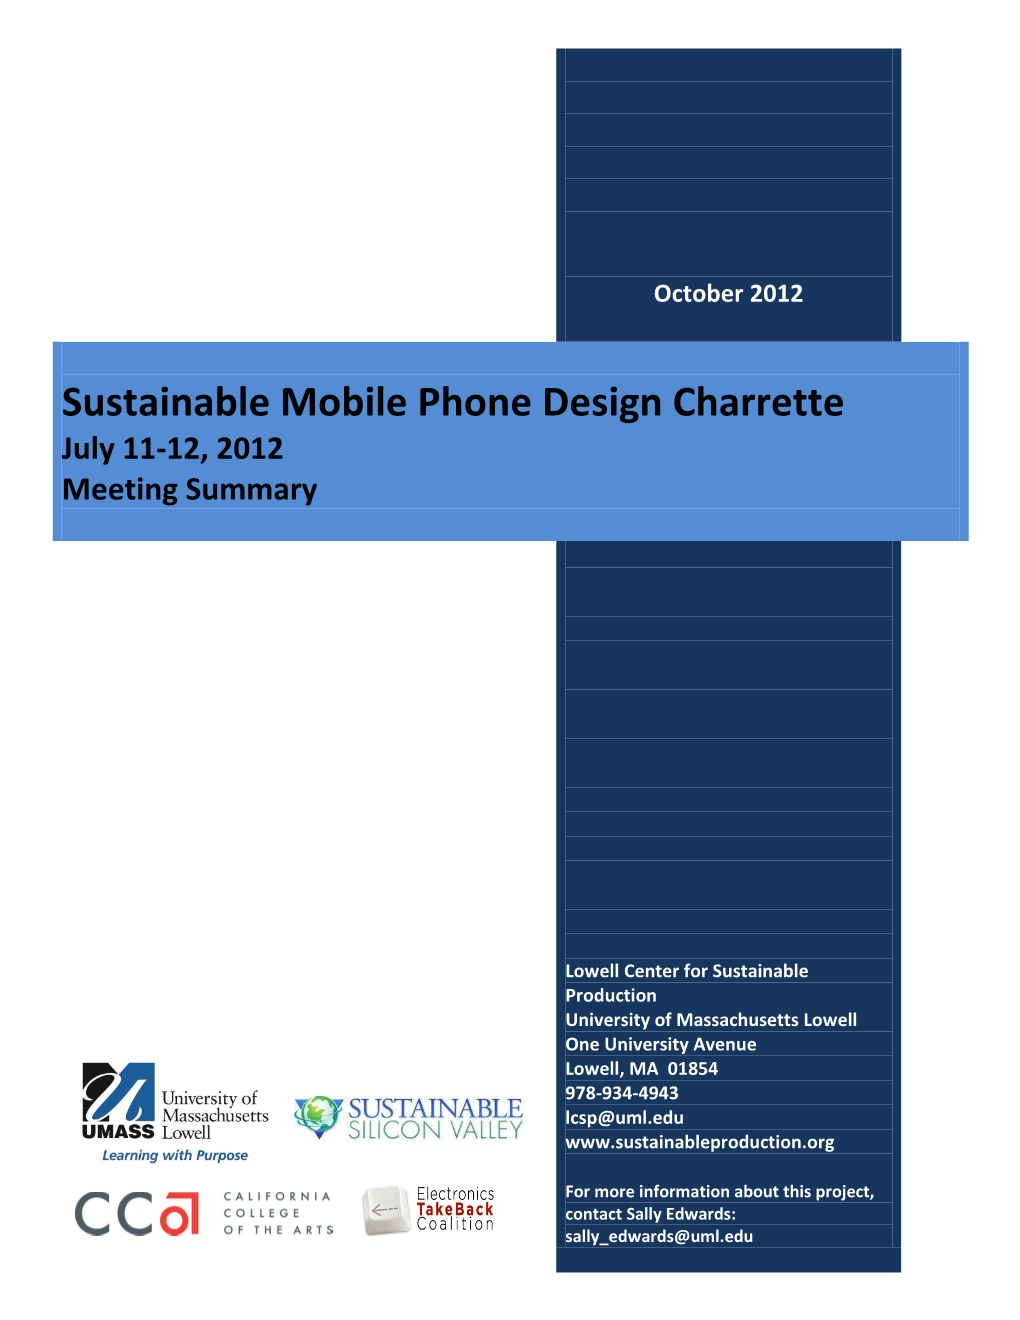 Sustainable Mobile Phone Design Charrette July 11-12, 2012 Meeting Summary